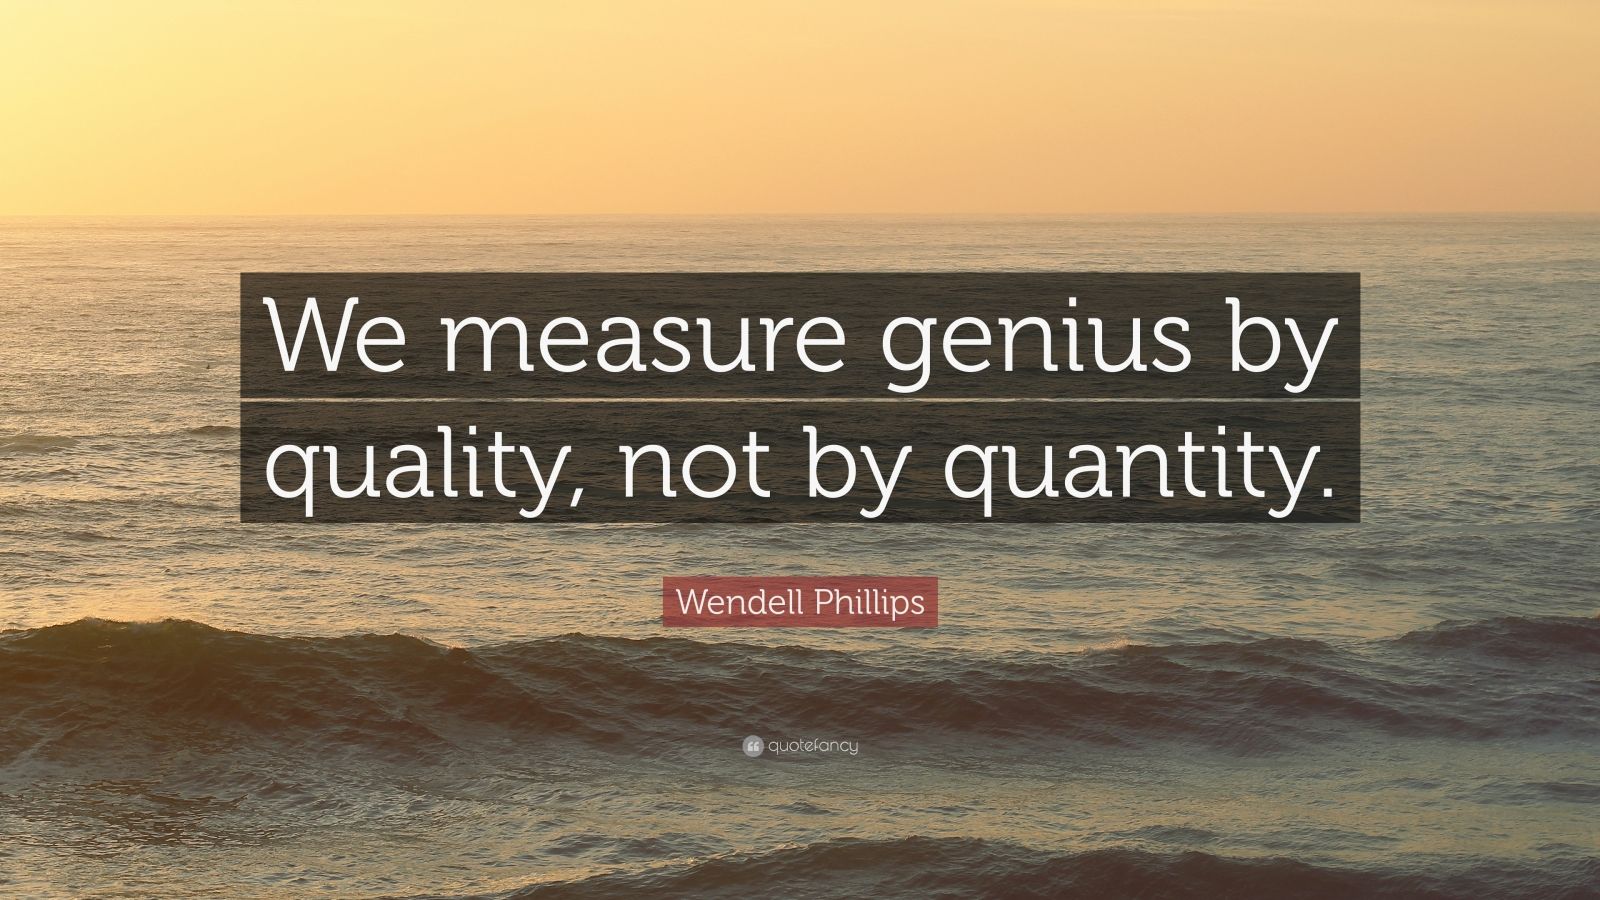 Wendell Phillips Quote: "We measure genius by quality, not by quantity." (7 wallpapers) - Quotefancy